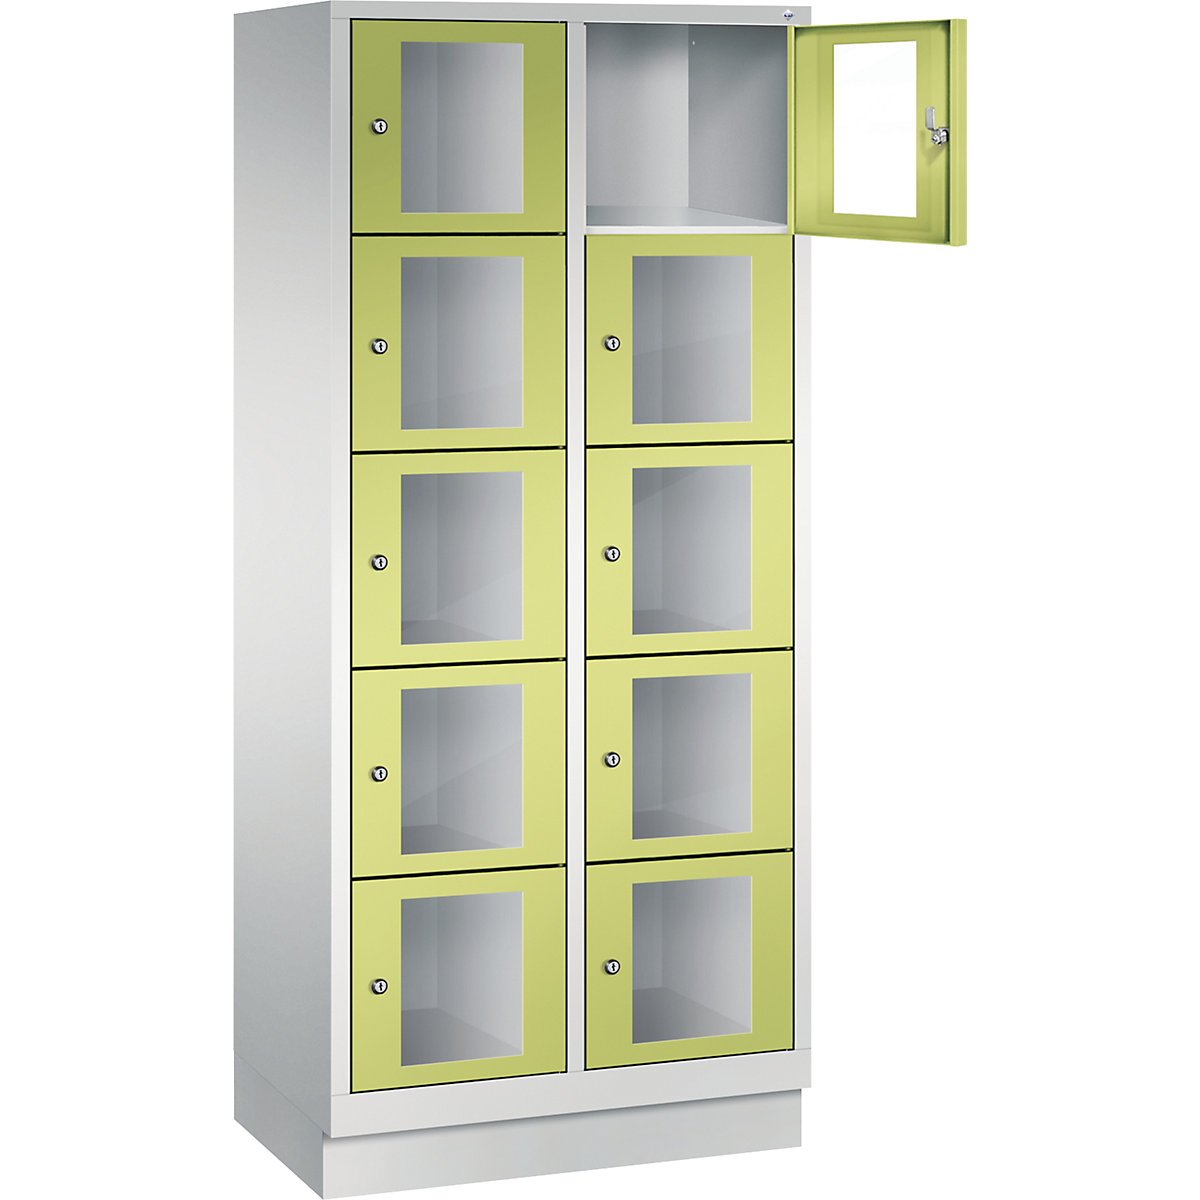 C+P – CLASSIC locker unit, compartment height 295 mm, with plinth, 10 compartments, width 810 mm, viridian green door